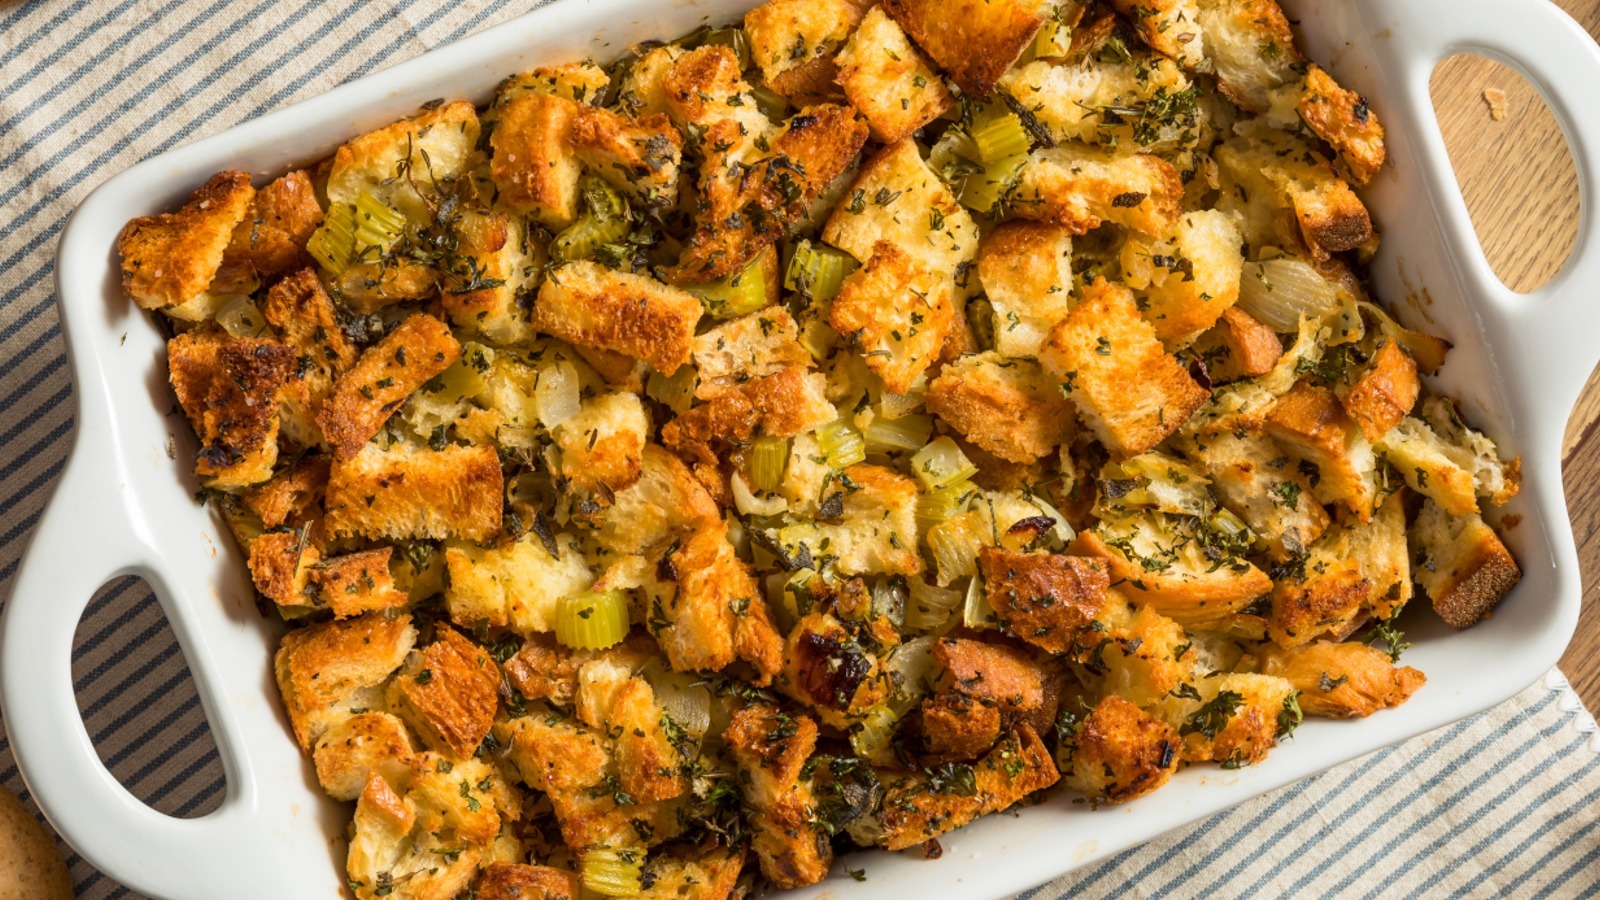 Why You Should Consider Using Two Types Of Bread In Your Stuffing